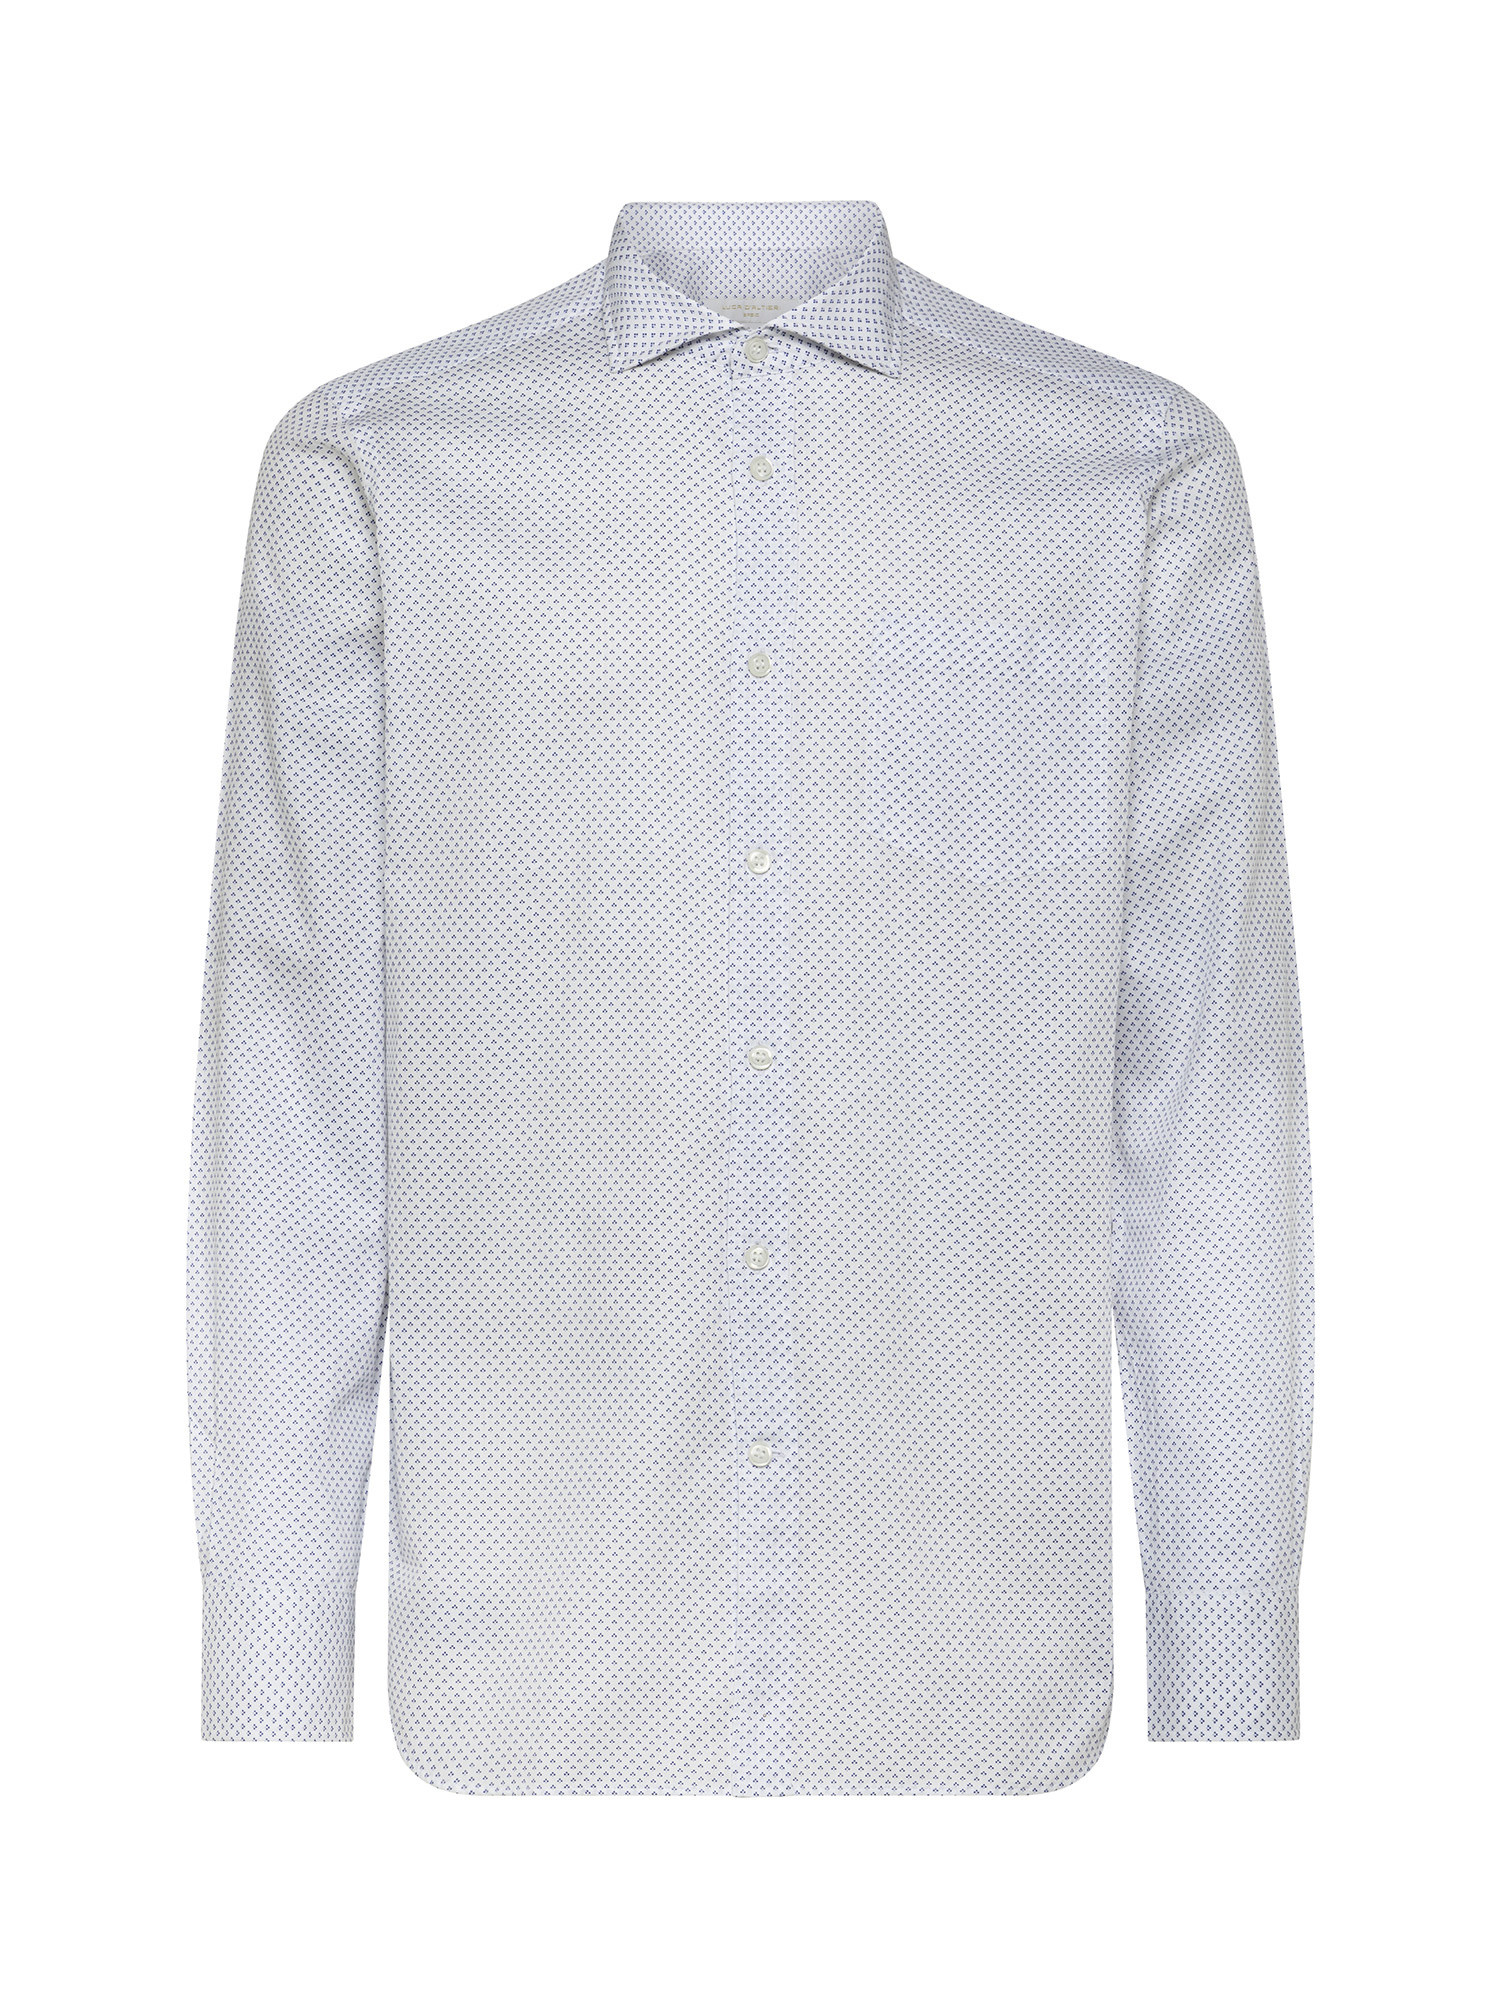 Basic slim fit shirt in pure cotton, White 1, large image number 1